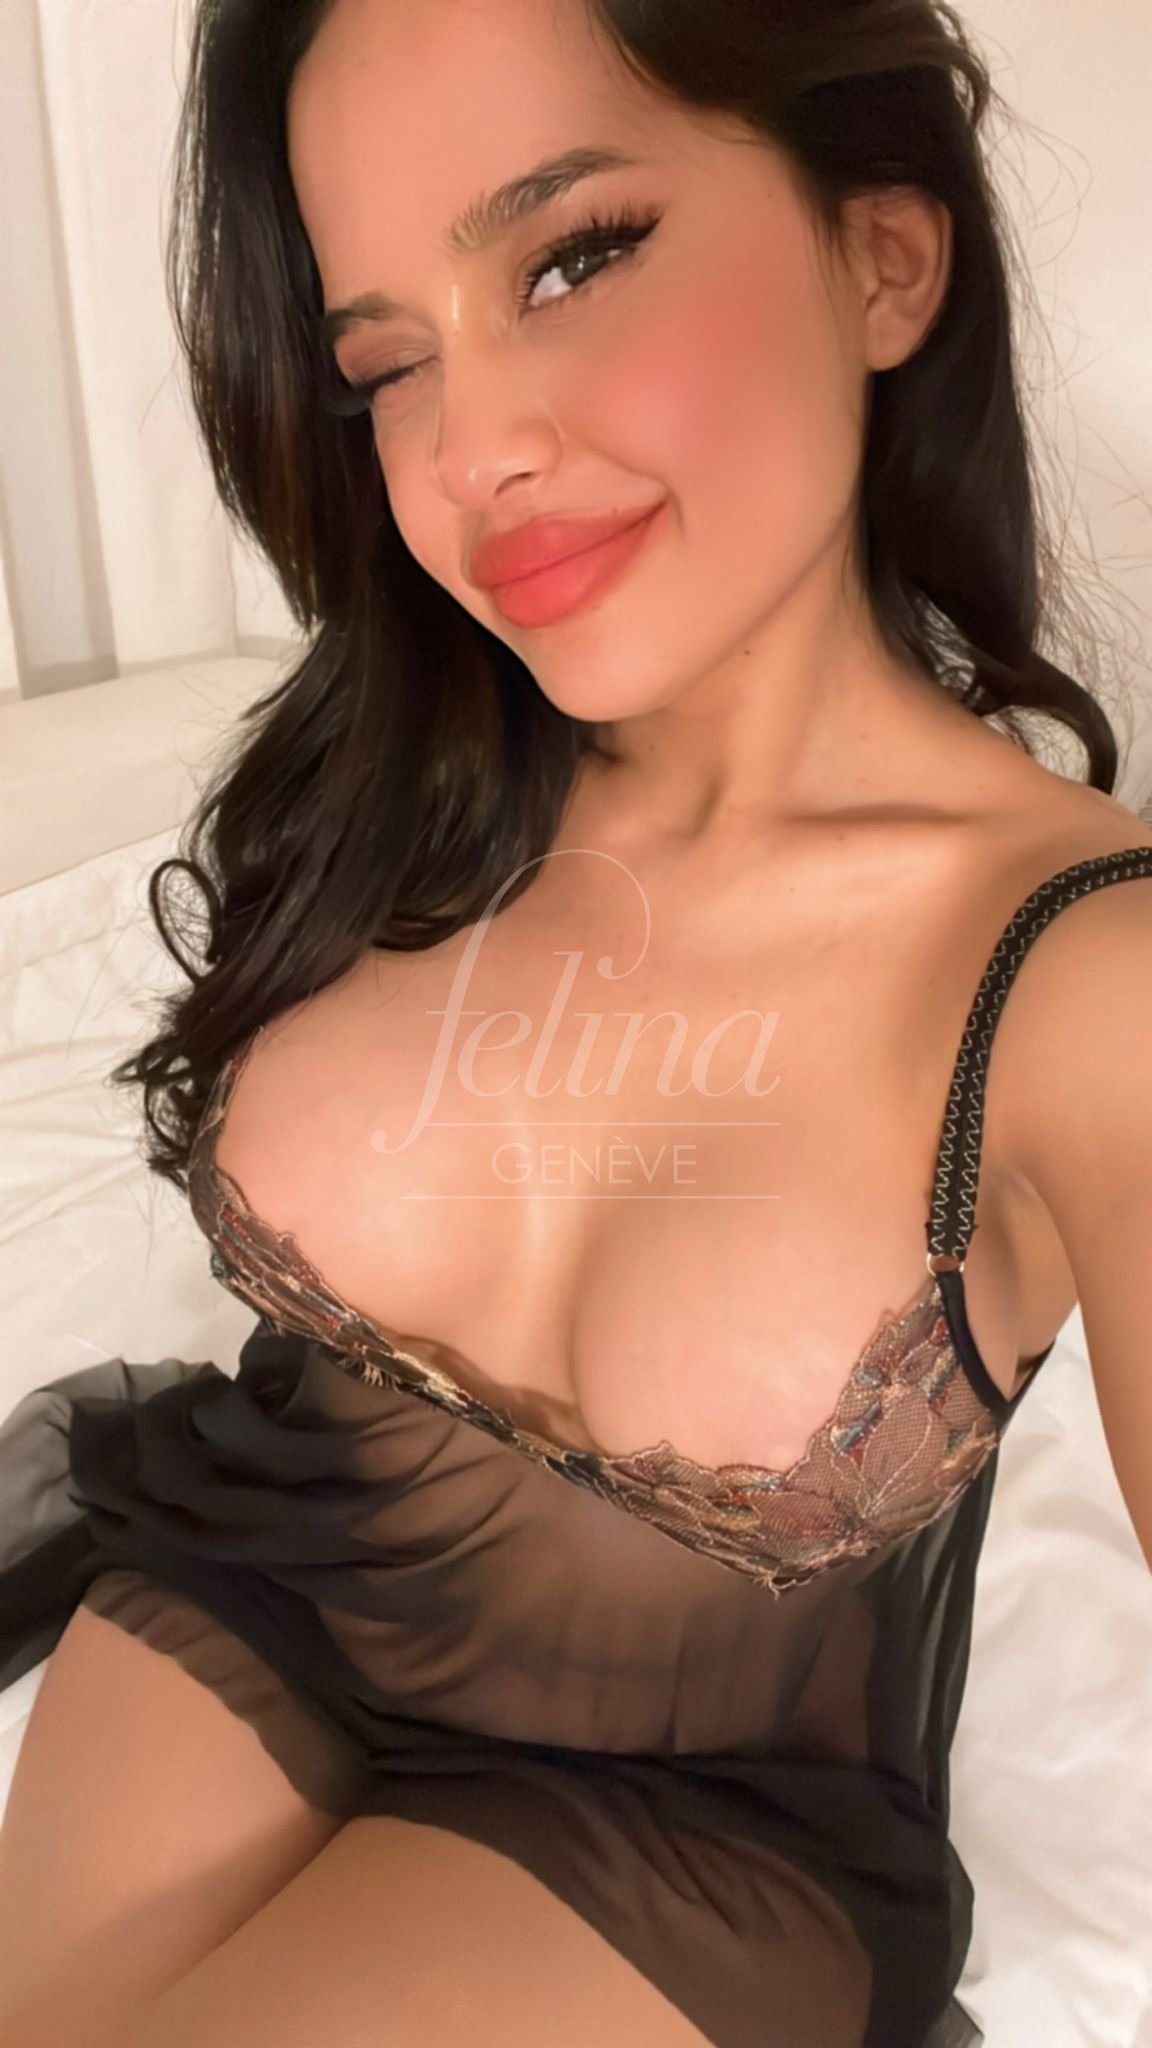 Geneva escort with subtly operated breasts for titjob at Felina Genève, Ana